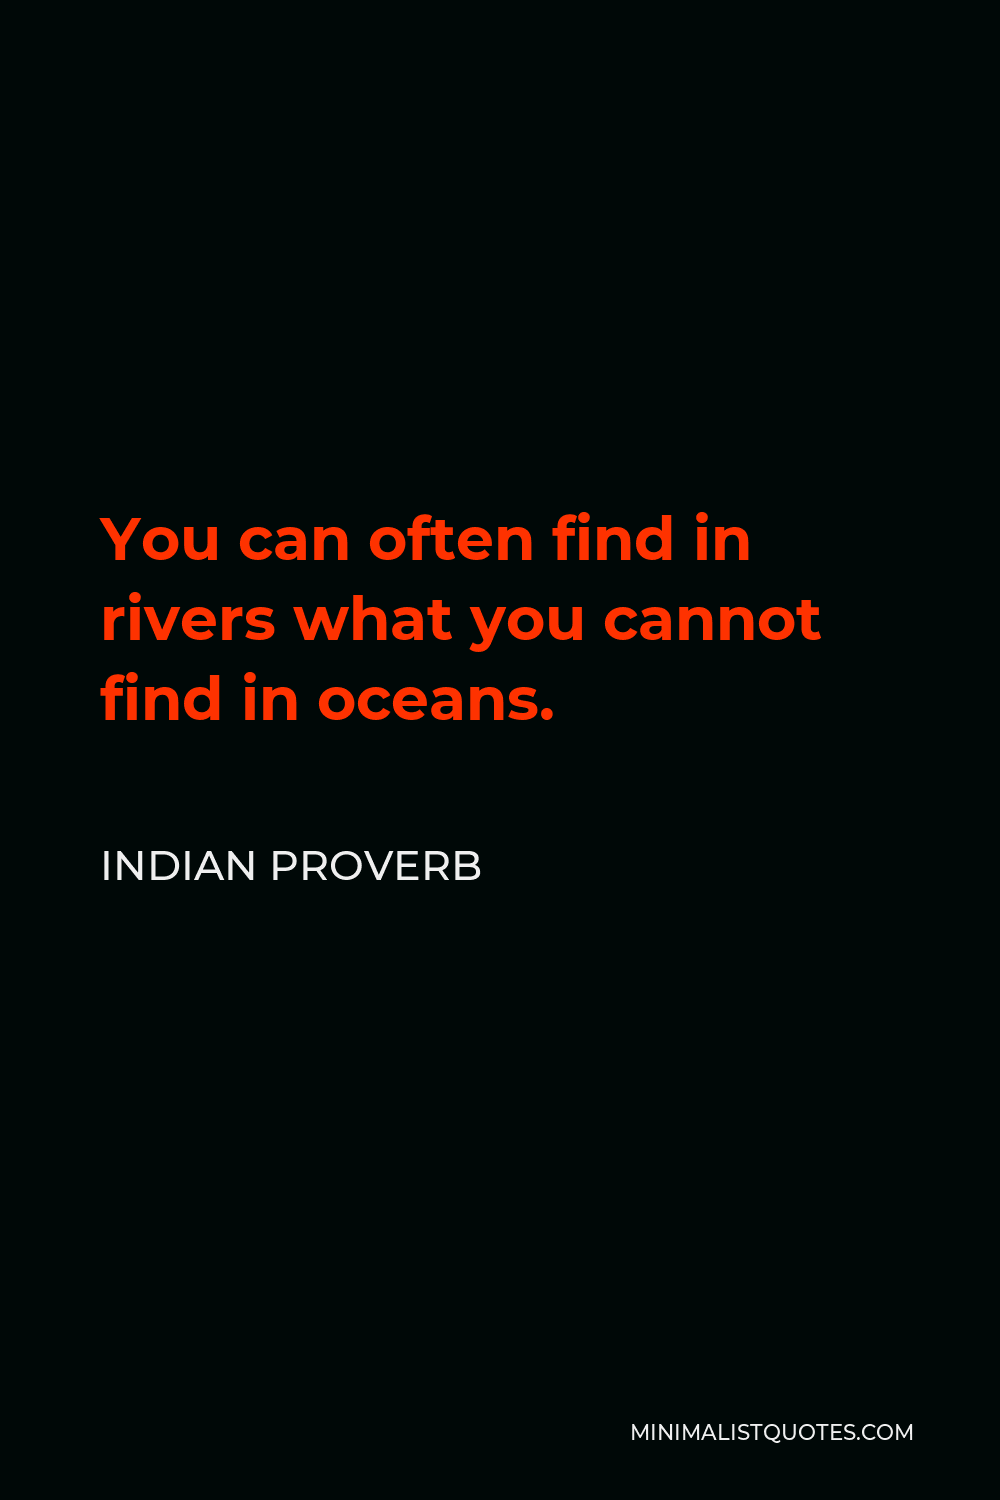 Indian Proverb Quote - You can often find in rivers what you cannot find in oceans.